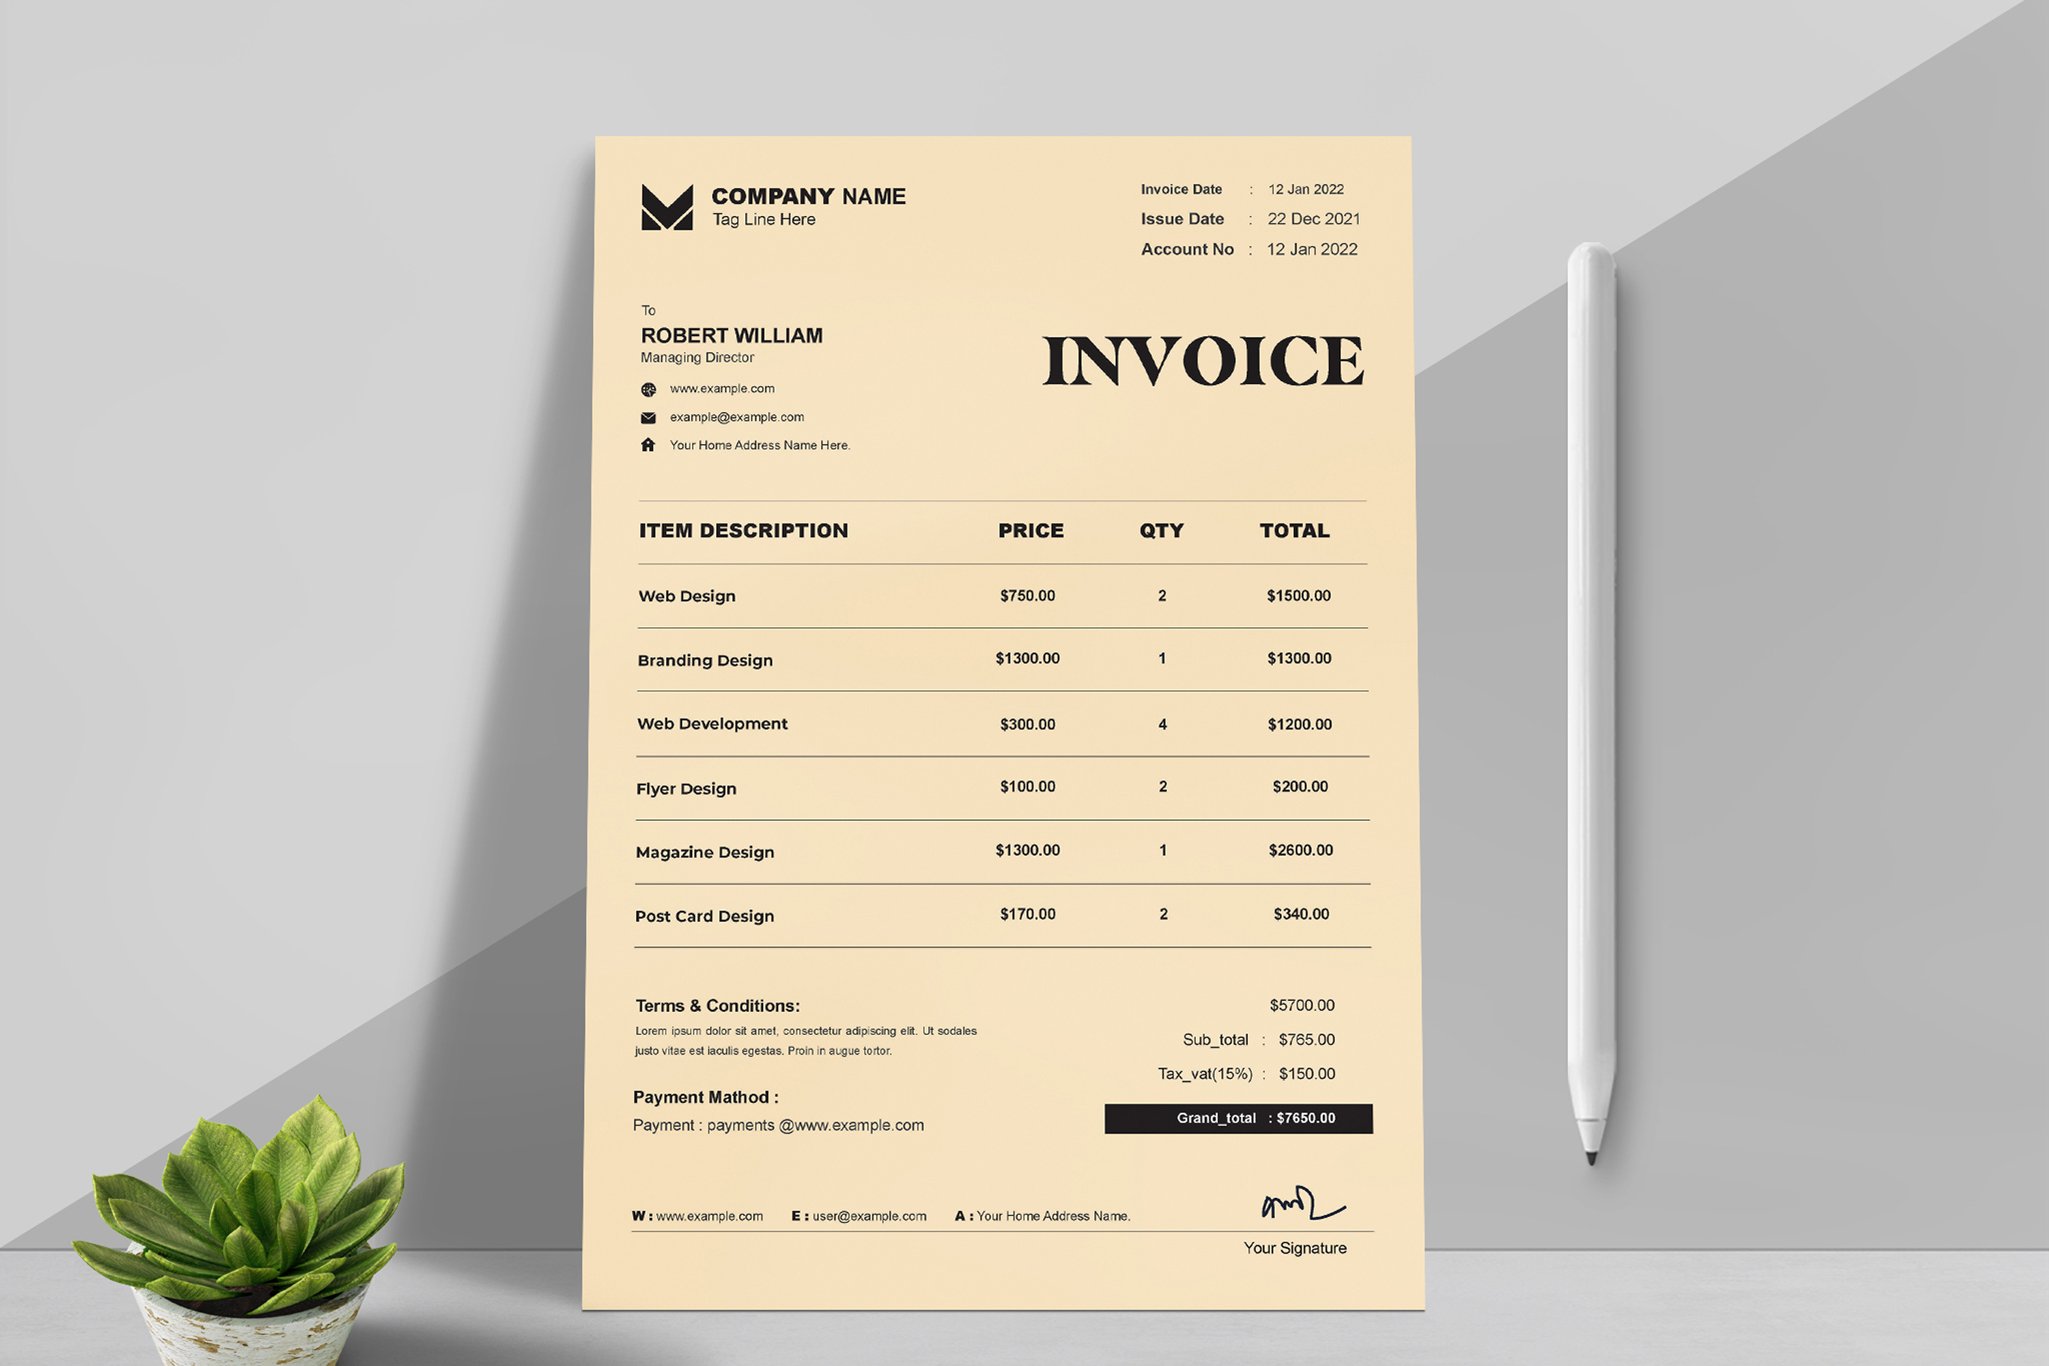 Invoice with Gold Gray Background cover image.